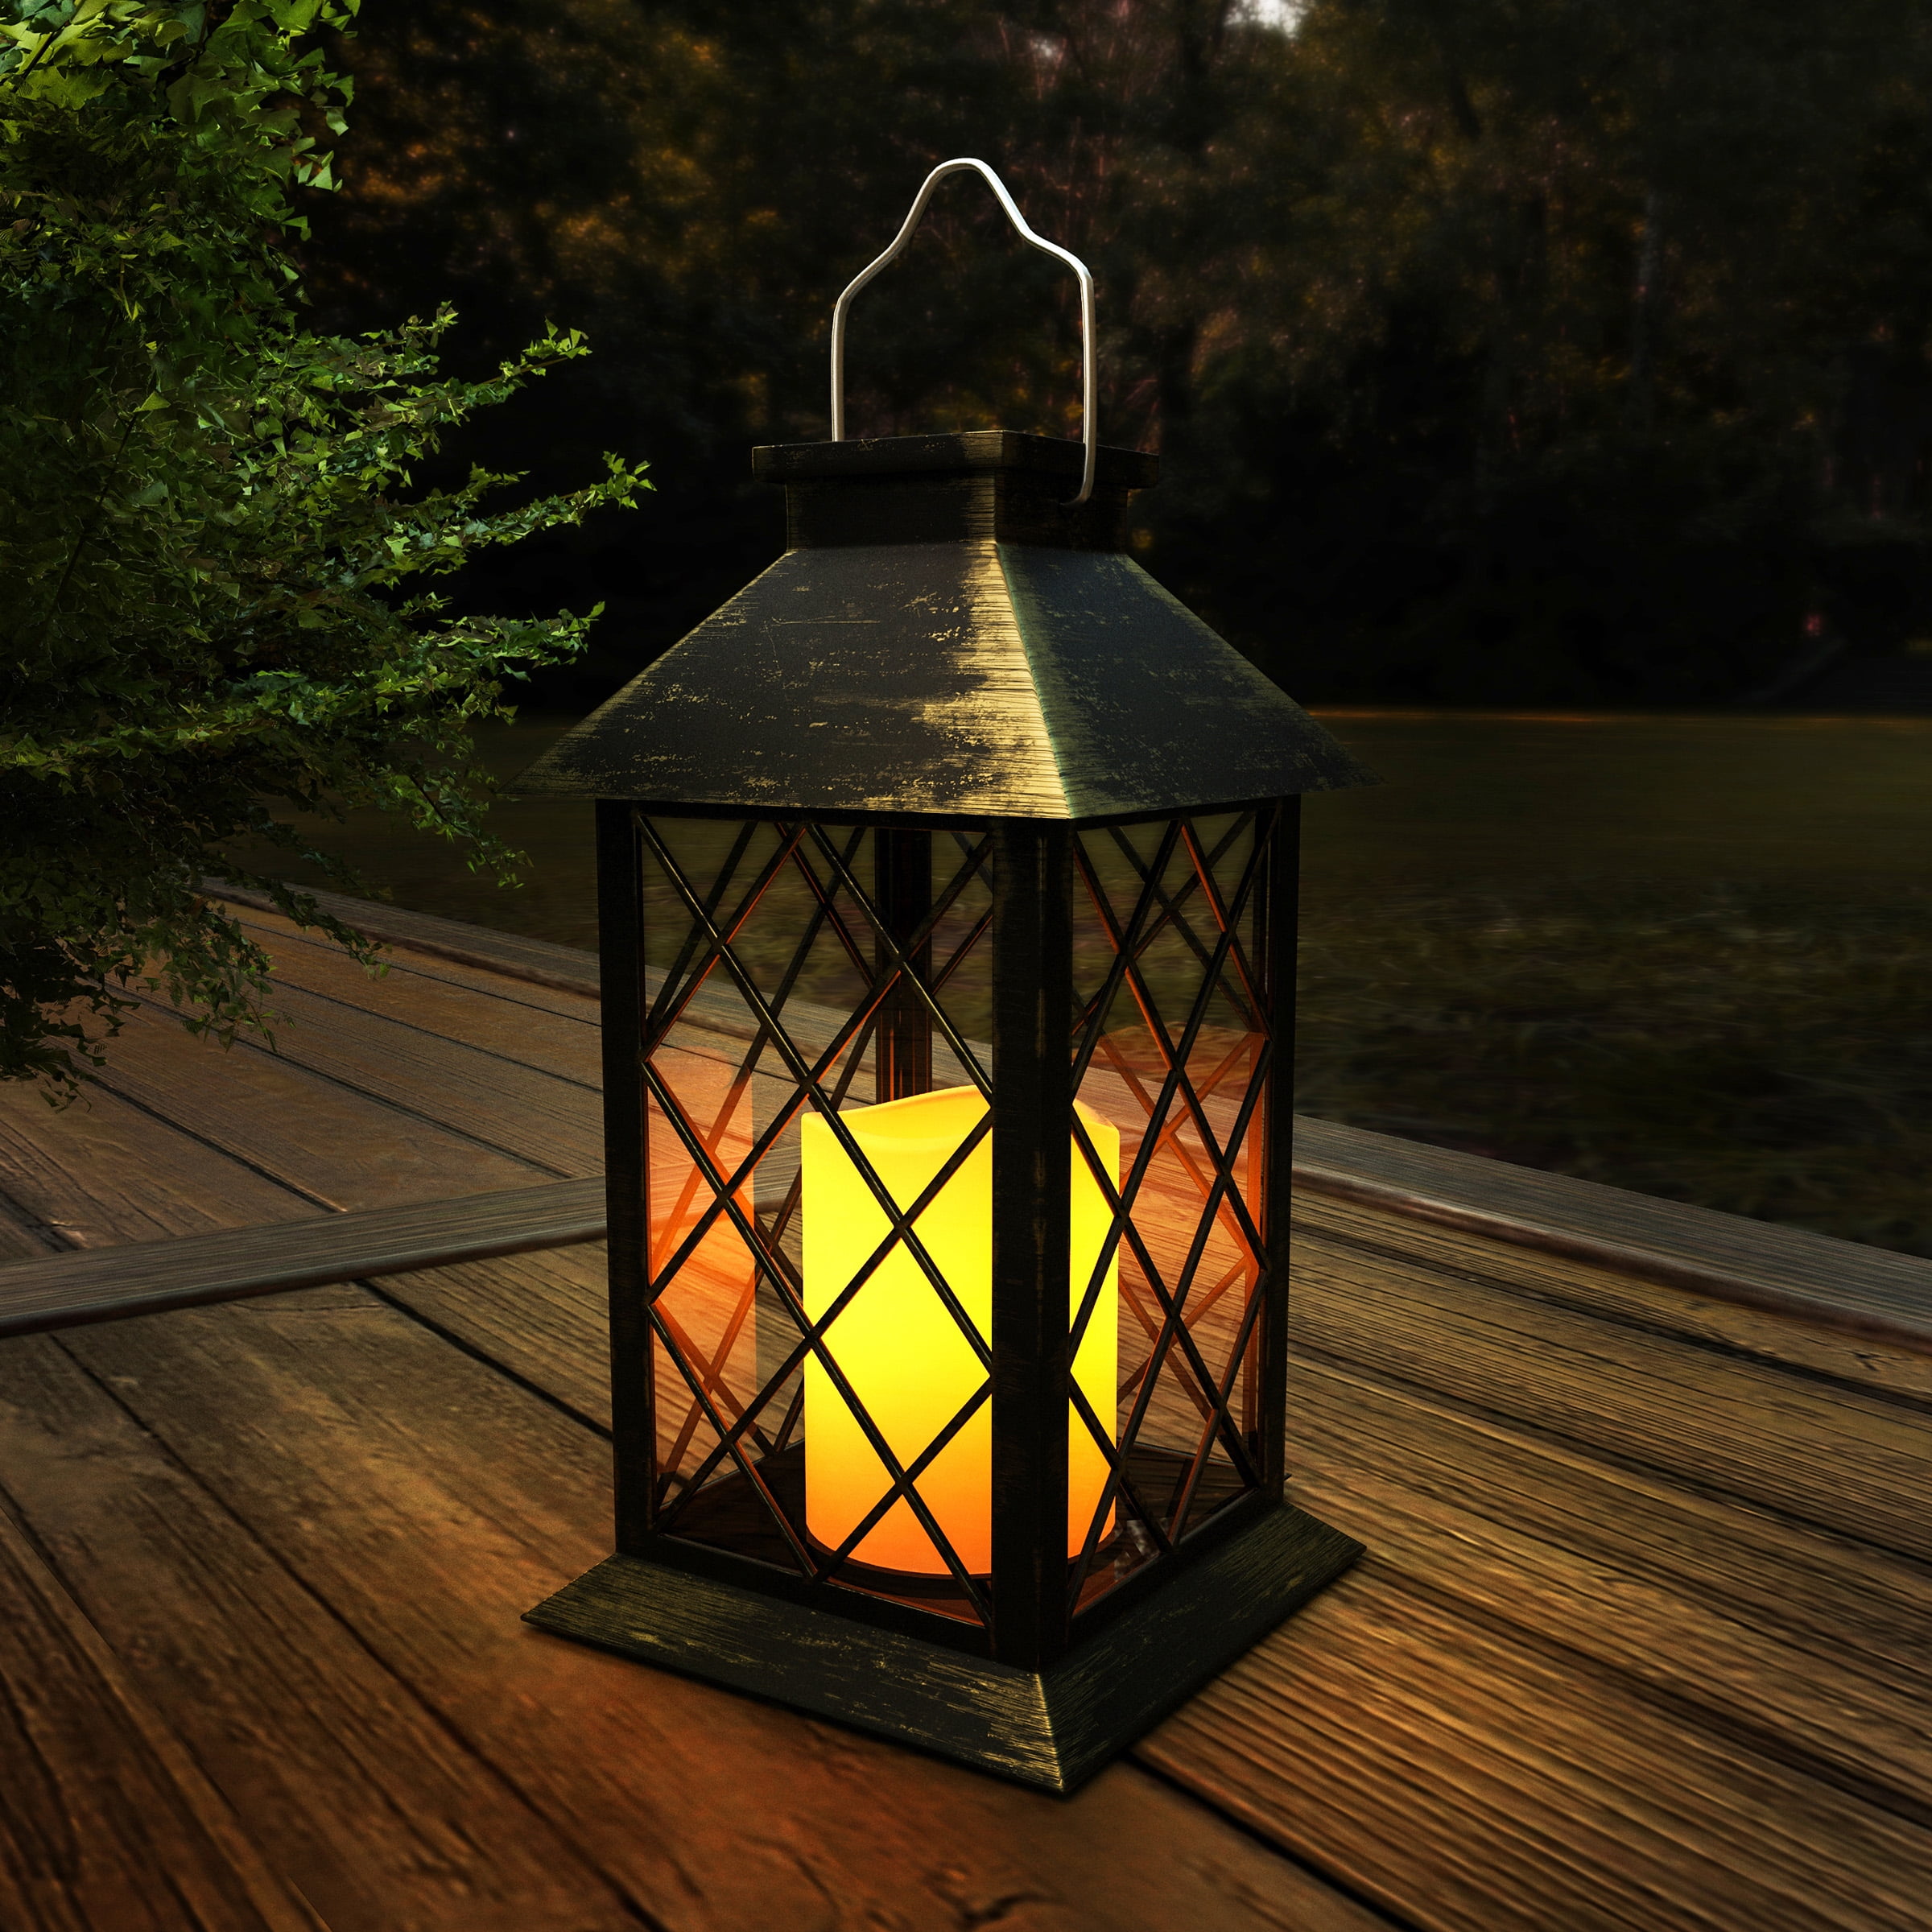 Iron Solar Powered Lamp Candle Hanging Table LED Lantern Outdoor Garden Light 